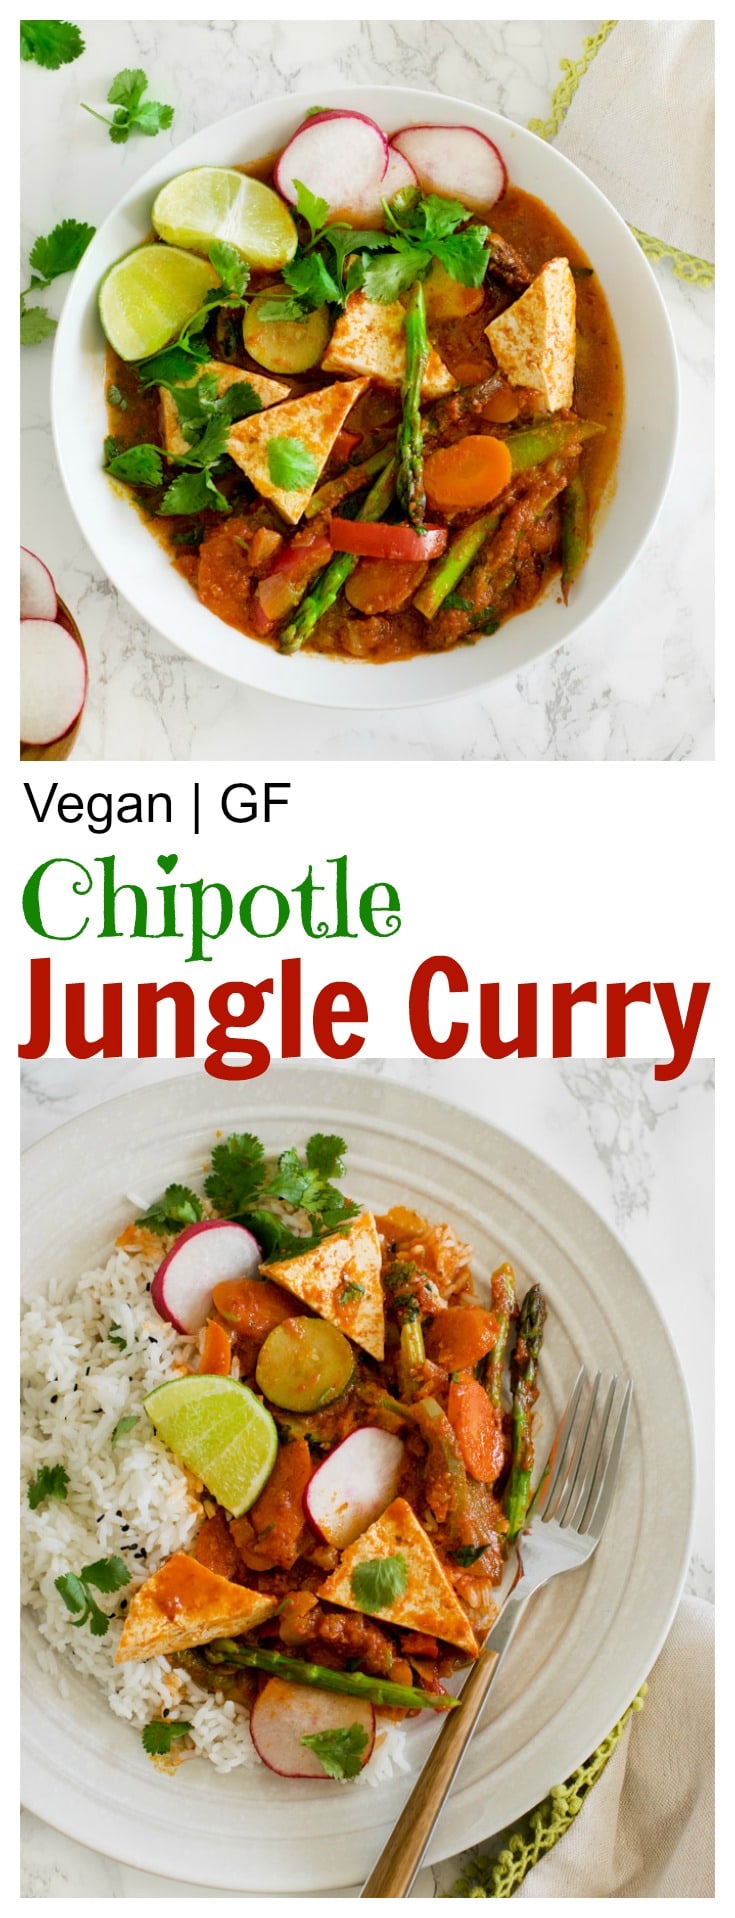 Vegan Glutwn free Chipotle Jungle curry under 30 minutes. Vegetarian meal